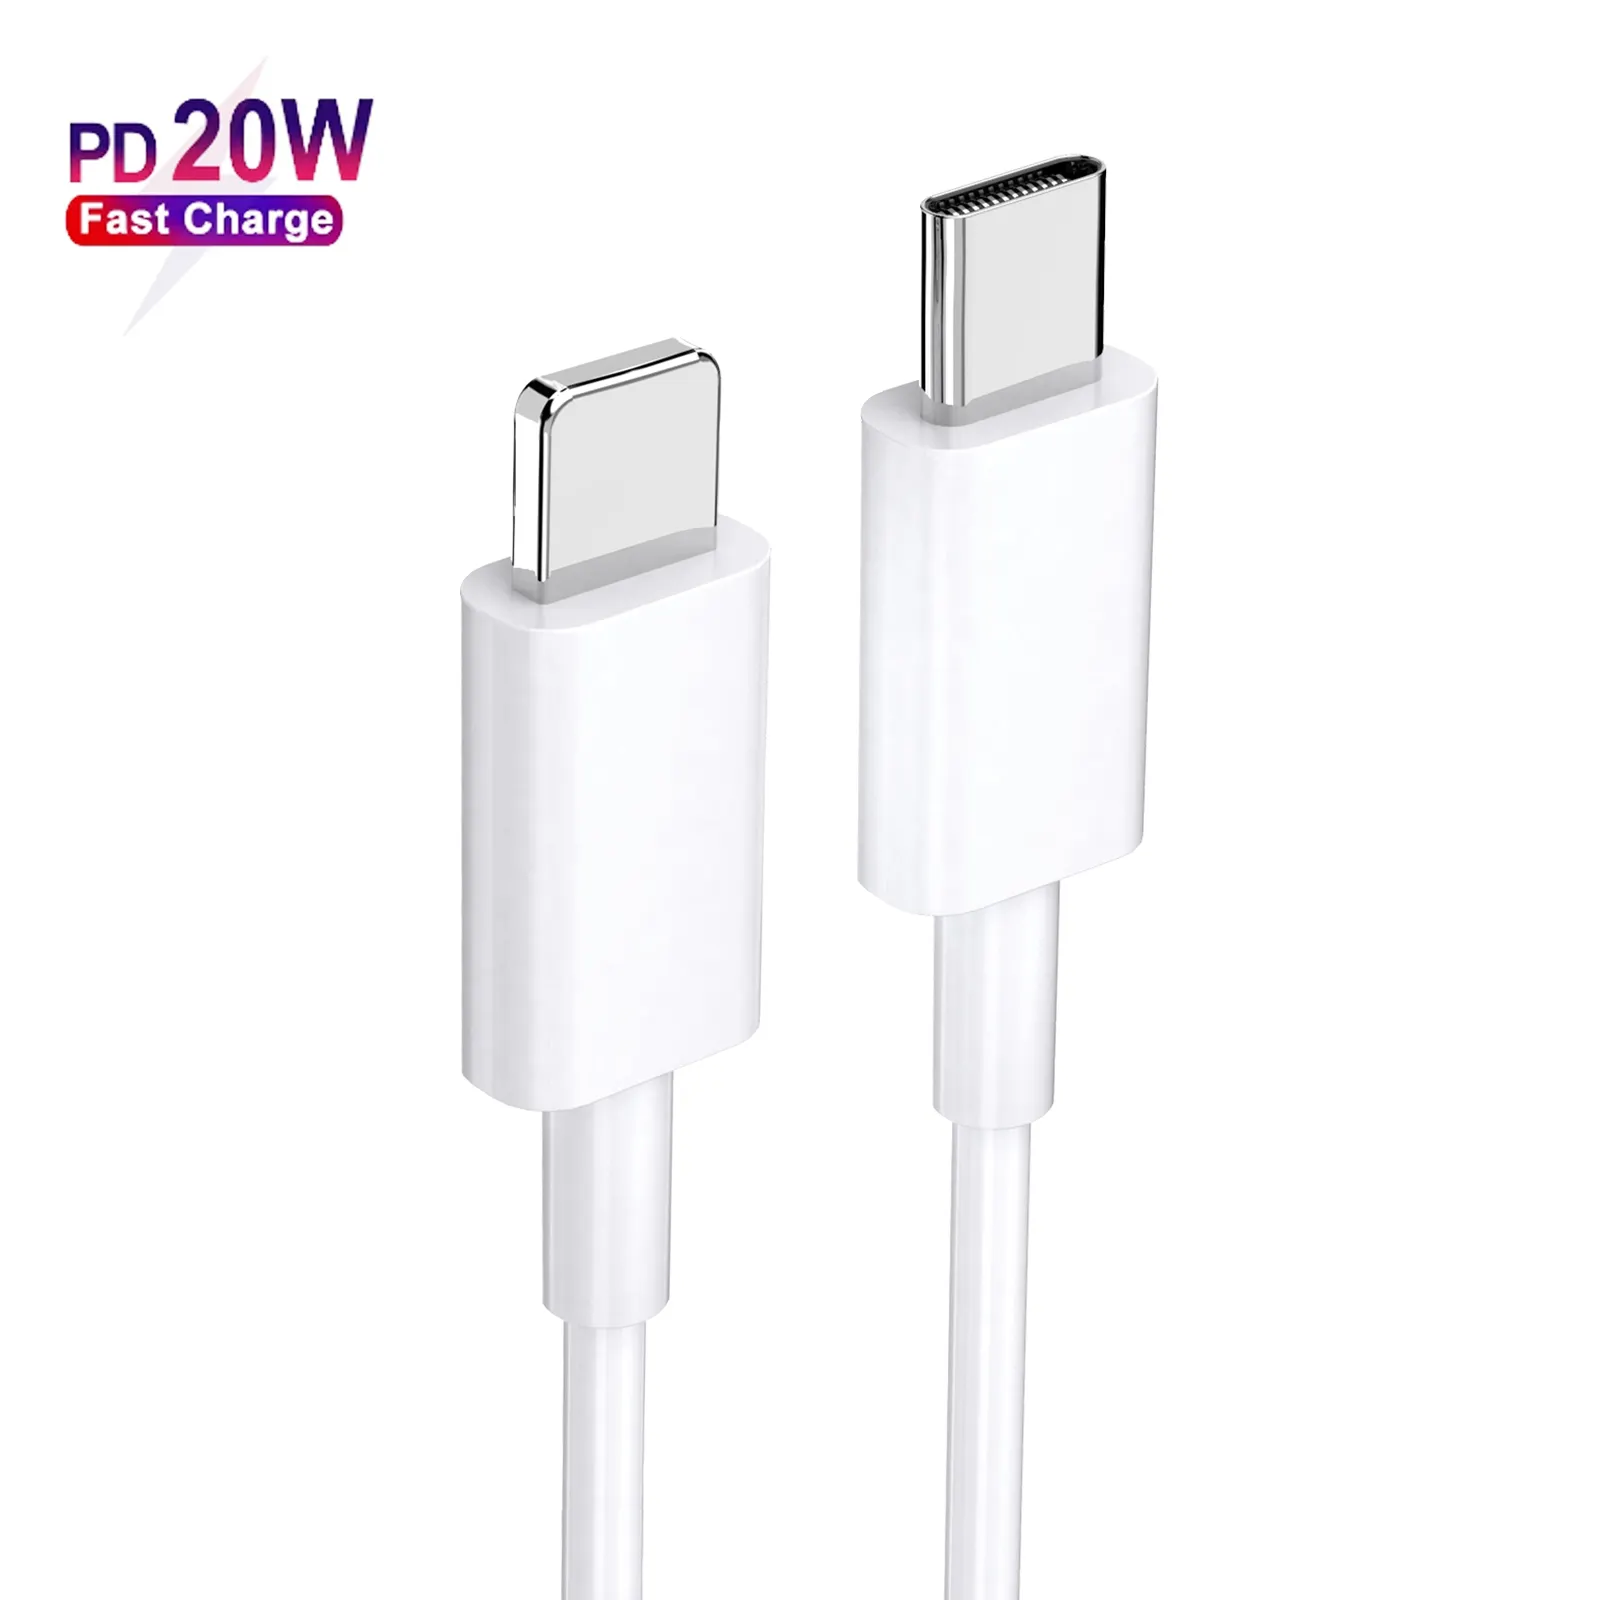 1 for iphone14 charger cable usbc usb c type-c to pd 20w fast charging data cable for android for iphone 11 12 13 14 pro max